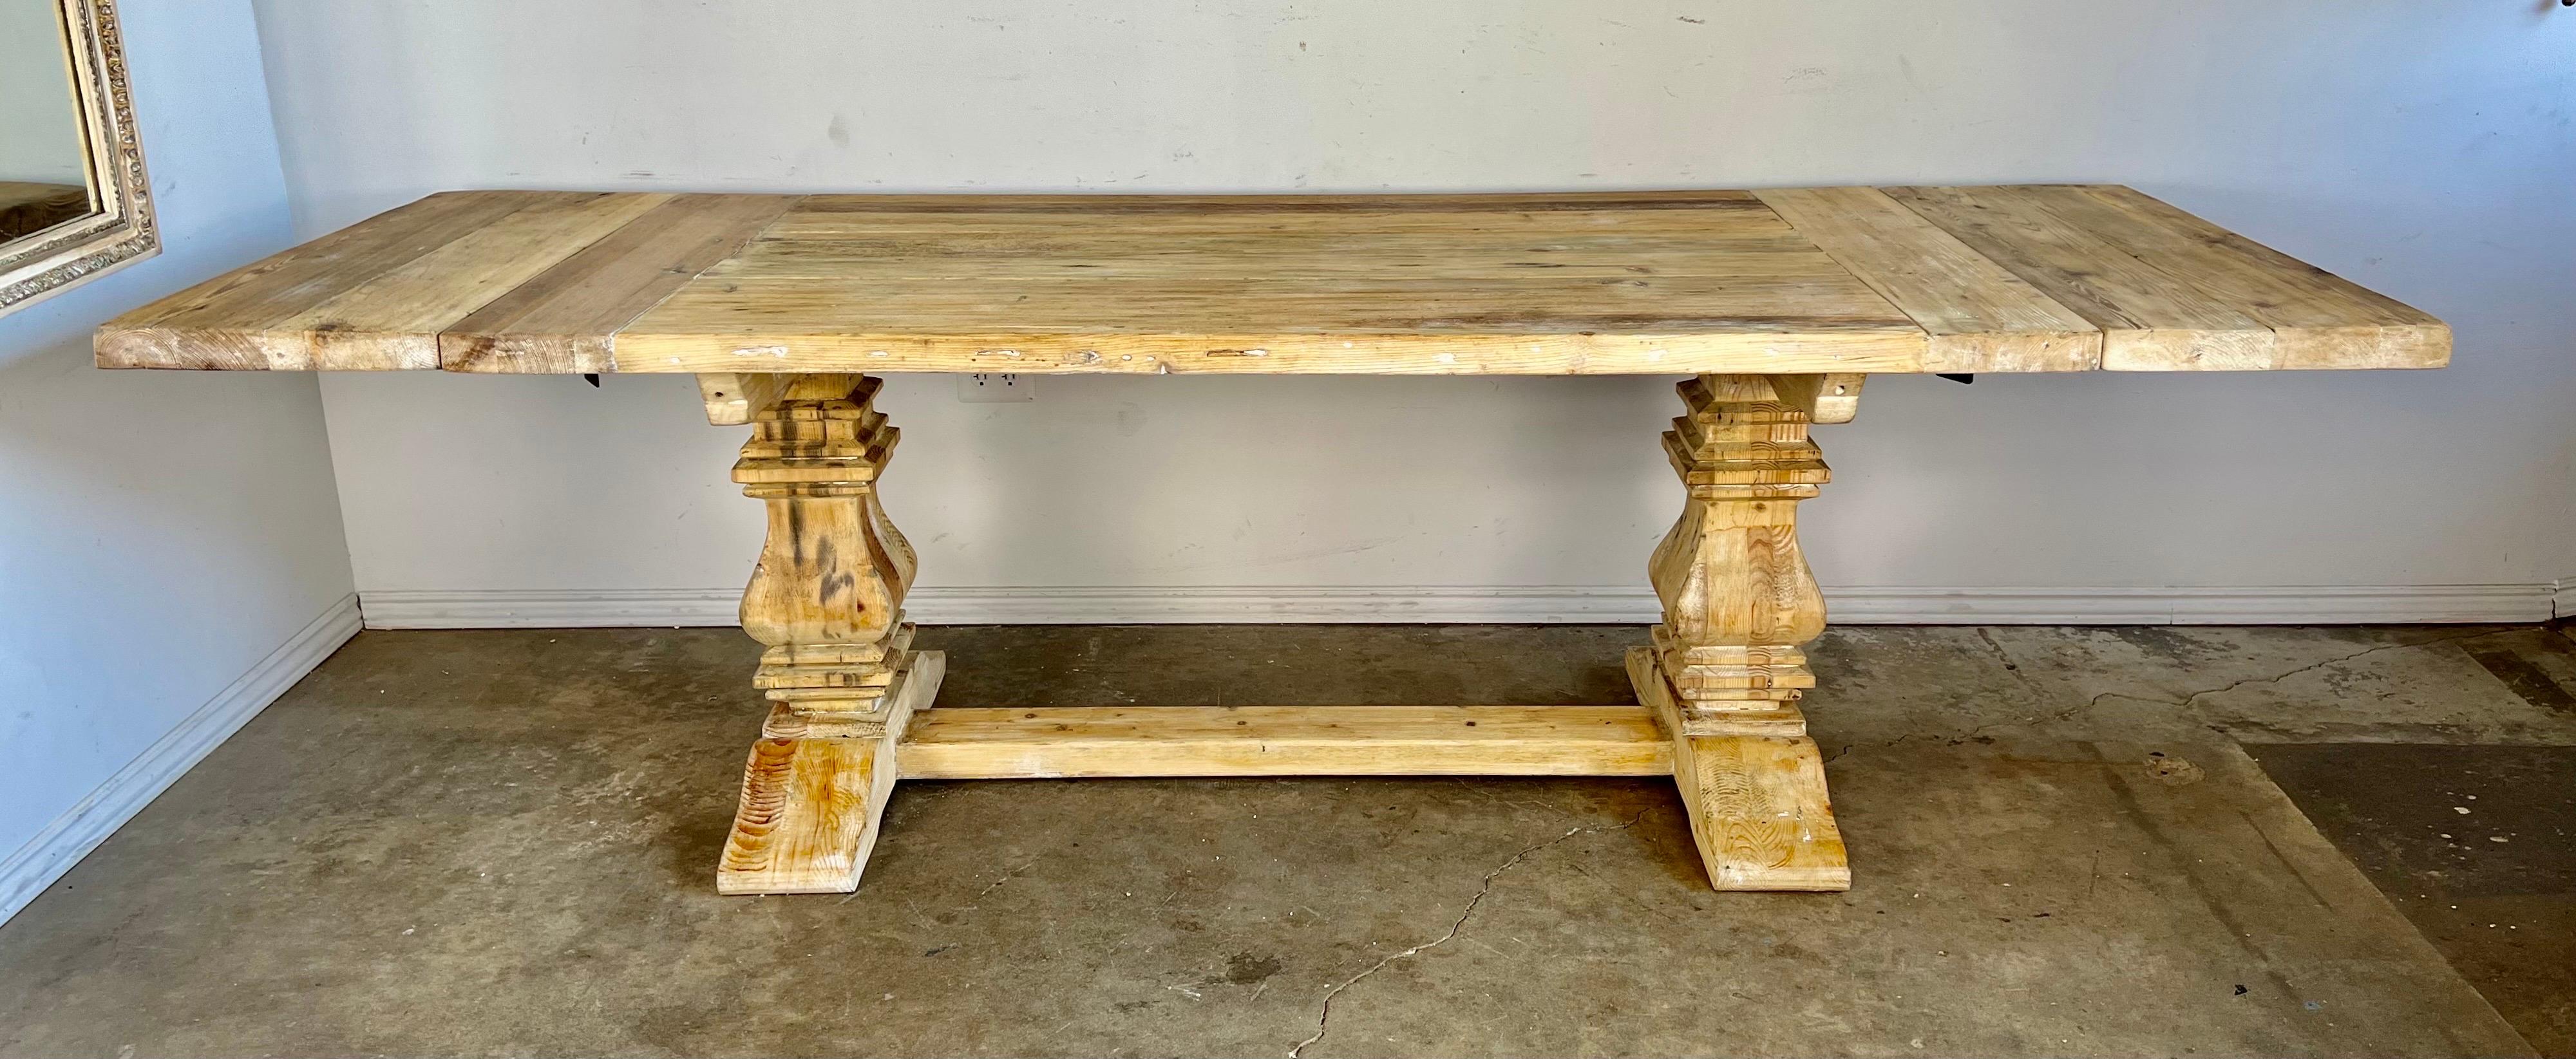 Italian Country pine table with two removable leaves. The table top stands on two pedestals and a bottom stretcher that connects the two sides. The table has a beautiful worn finish and is extremely sturdy.
Size without leaves: 72